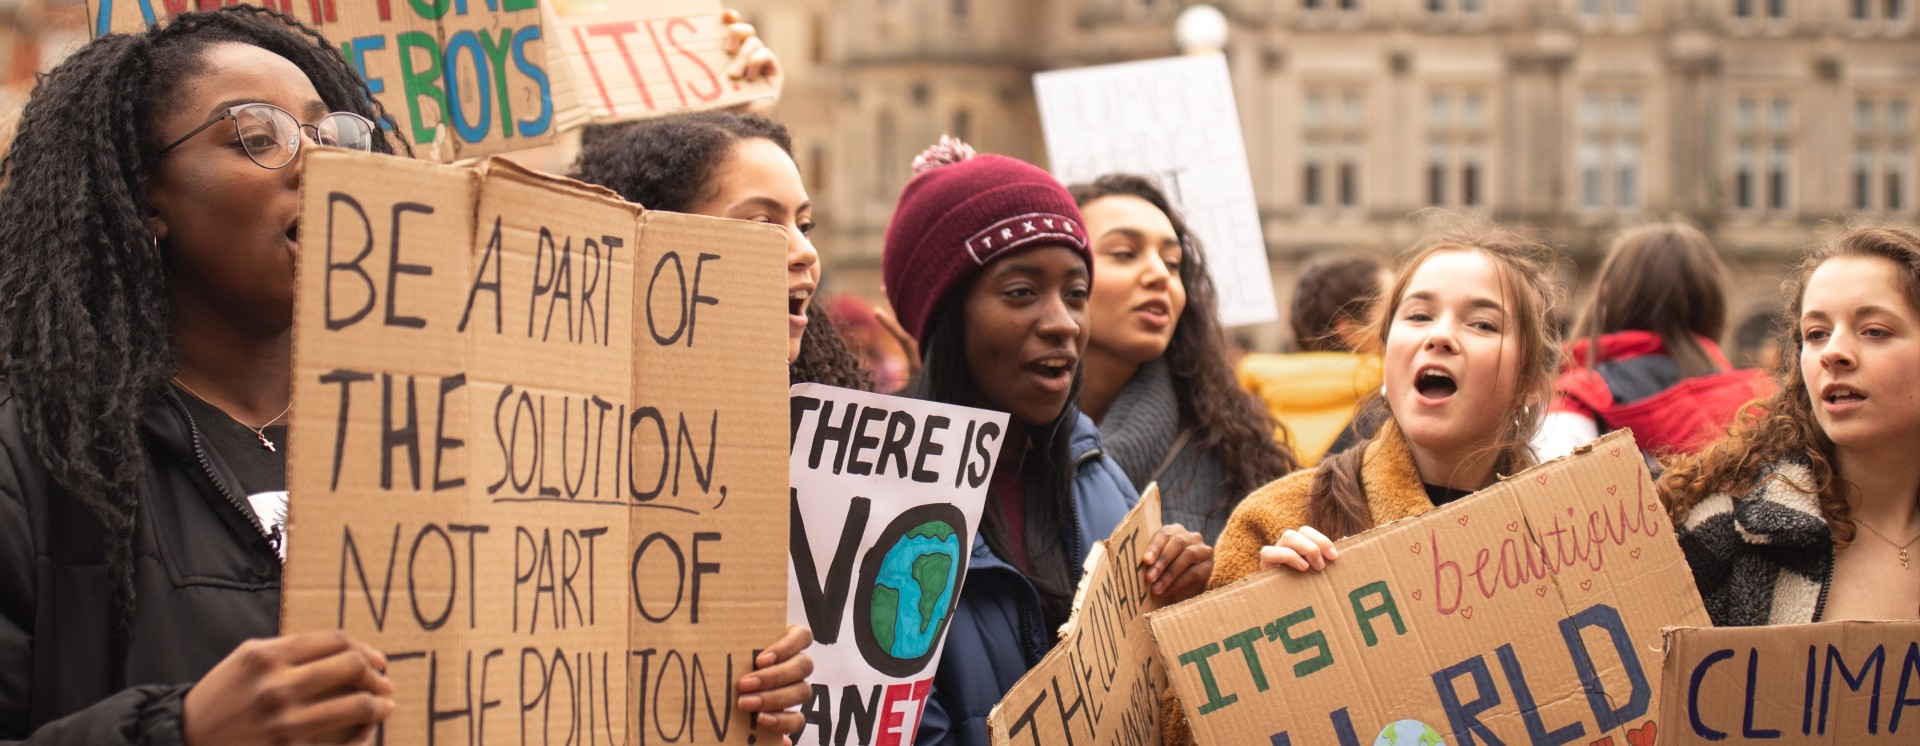 A crowd of young people protesting climate change